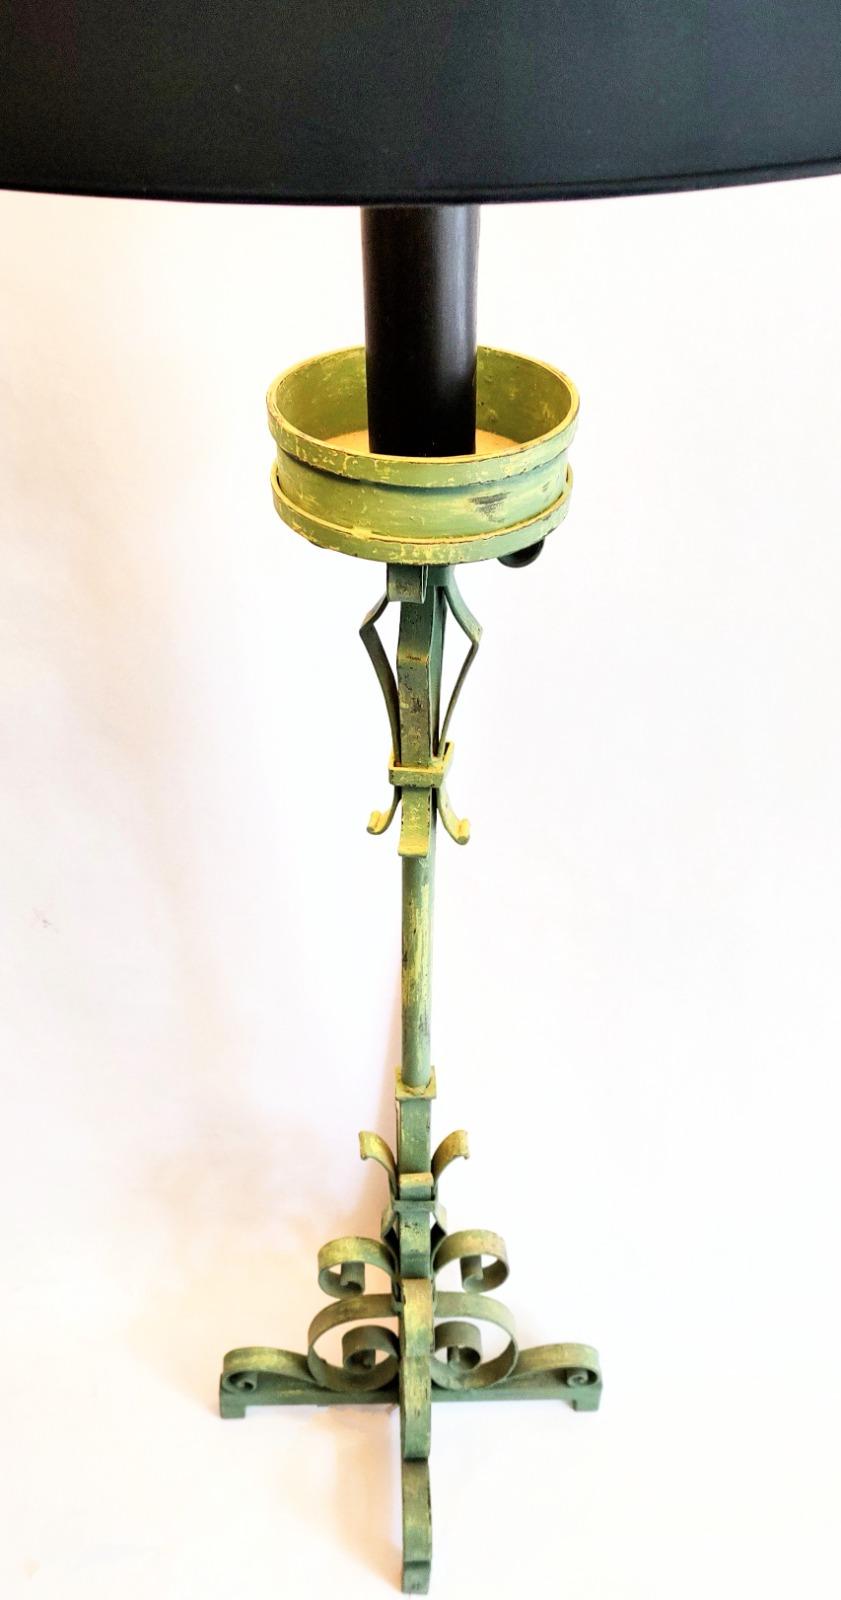 Forged Original and Elegant Wrought Iron Lamp from the 1950s. in Green, Black and Gold. For Sale